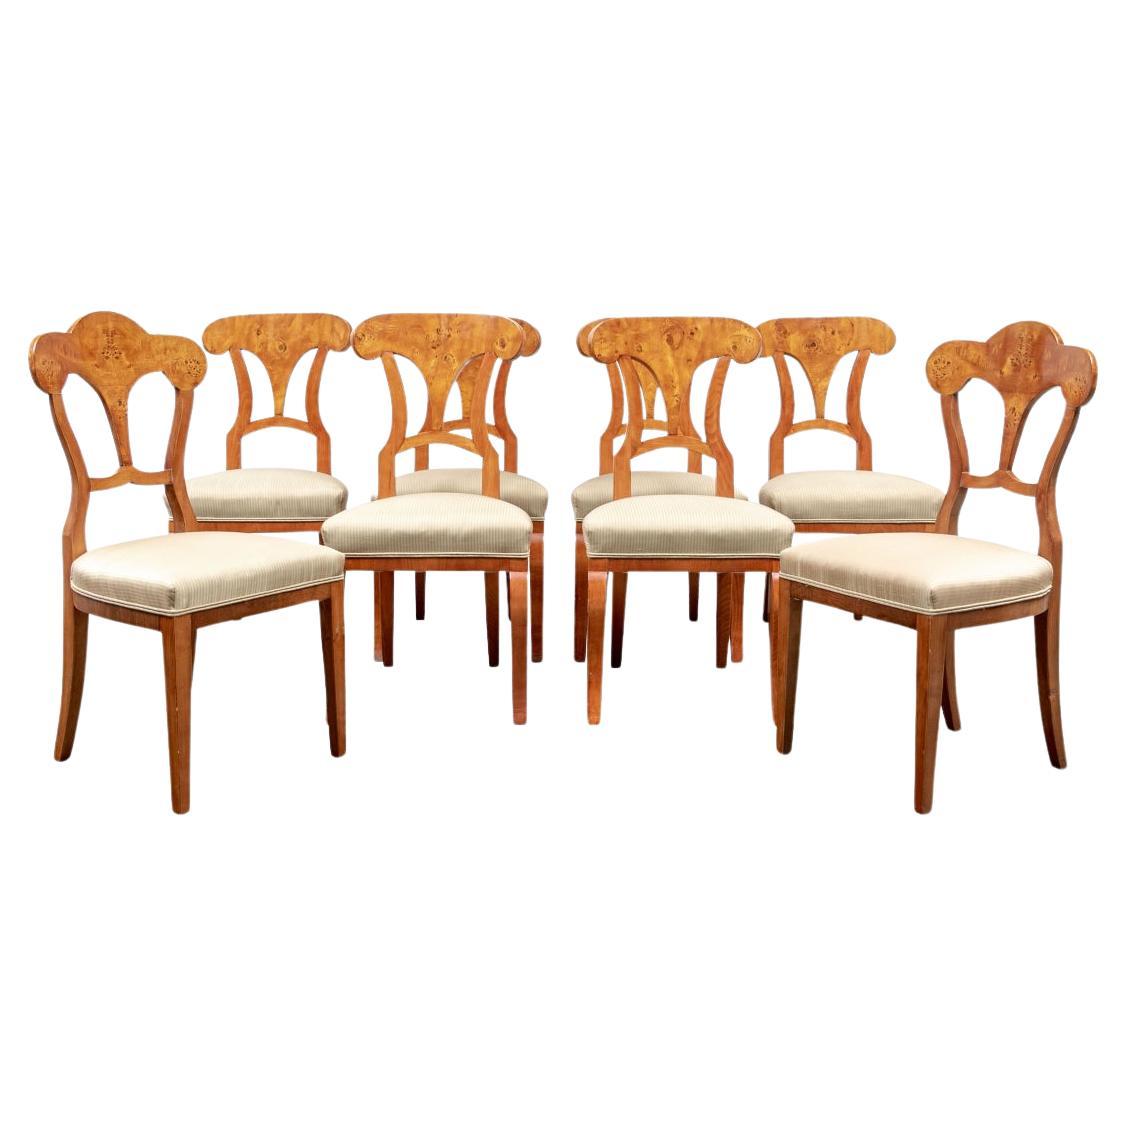 Blended Set Of 8 Fine Biedermeier Style Dining Room Chairs